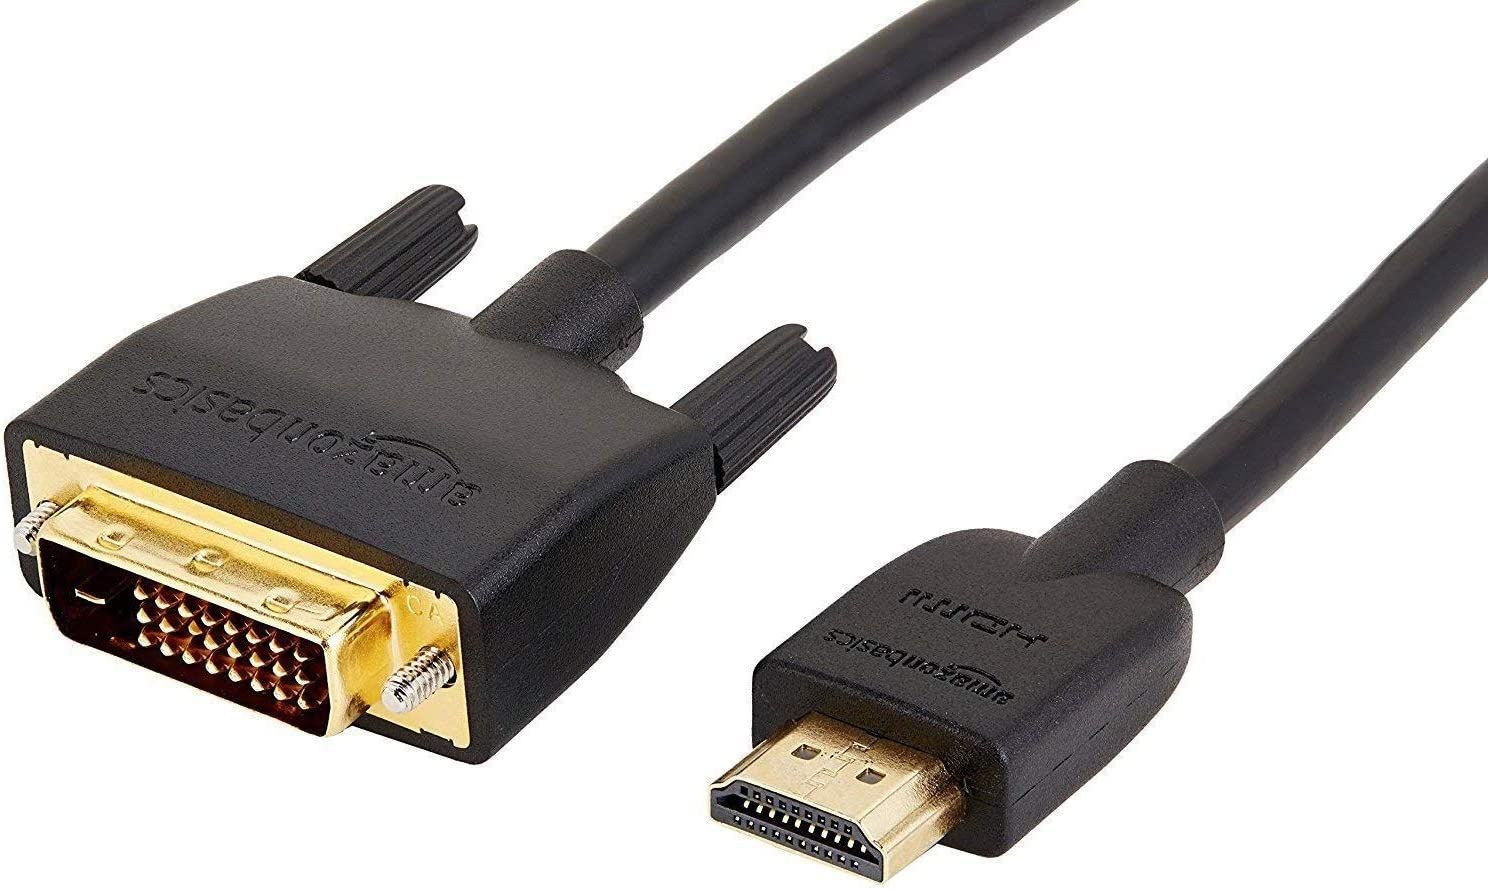 HDMI to DVI Adapter Cable, Black, 6 Feet,